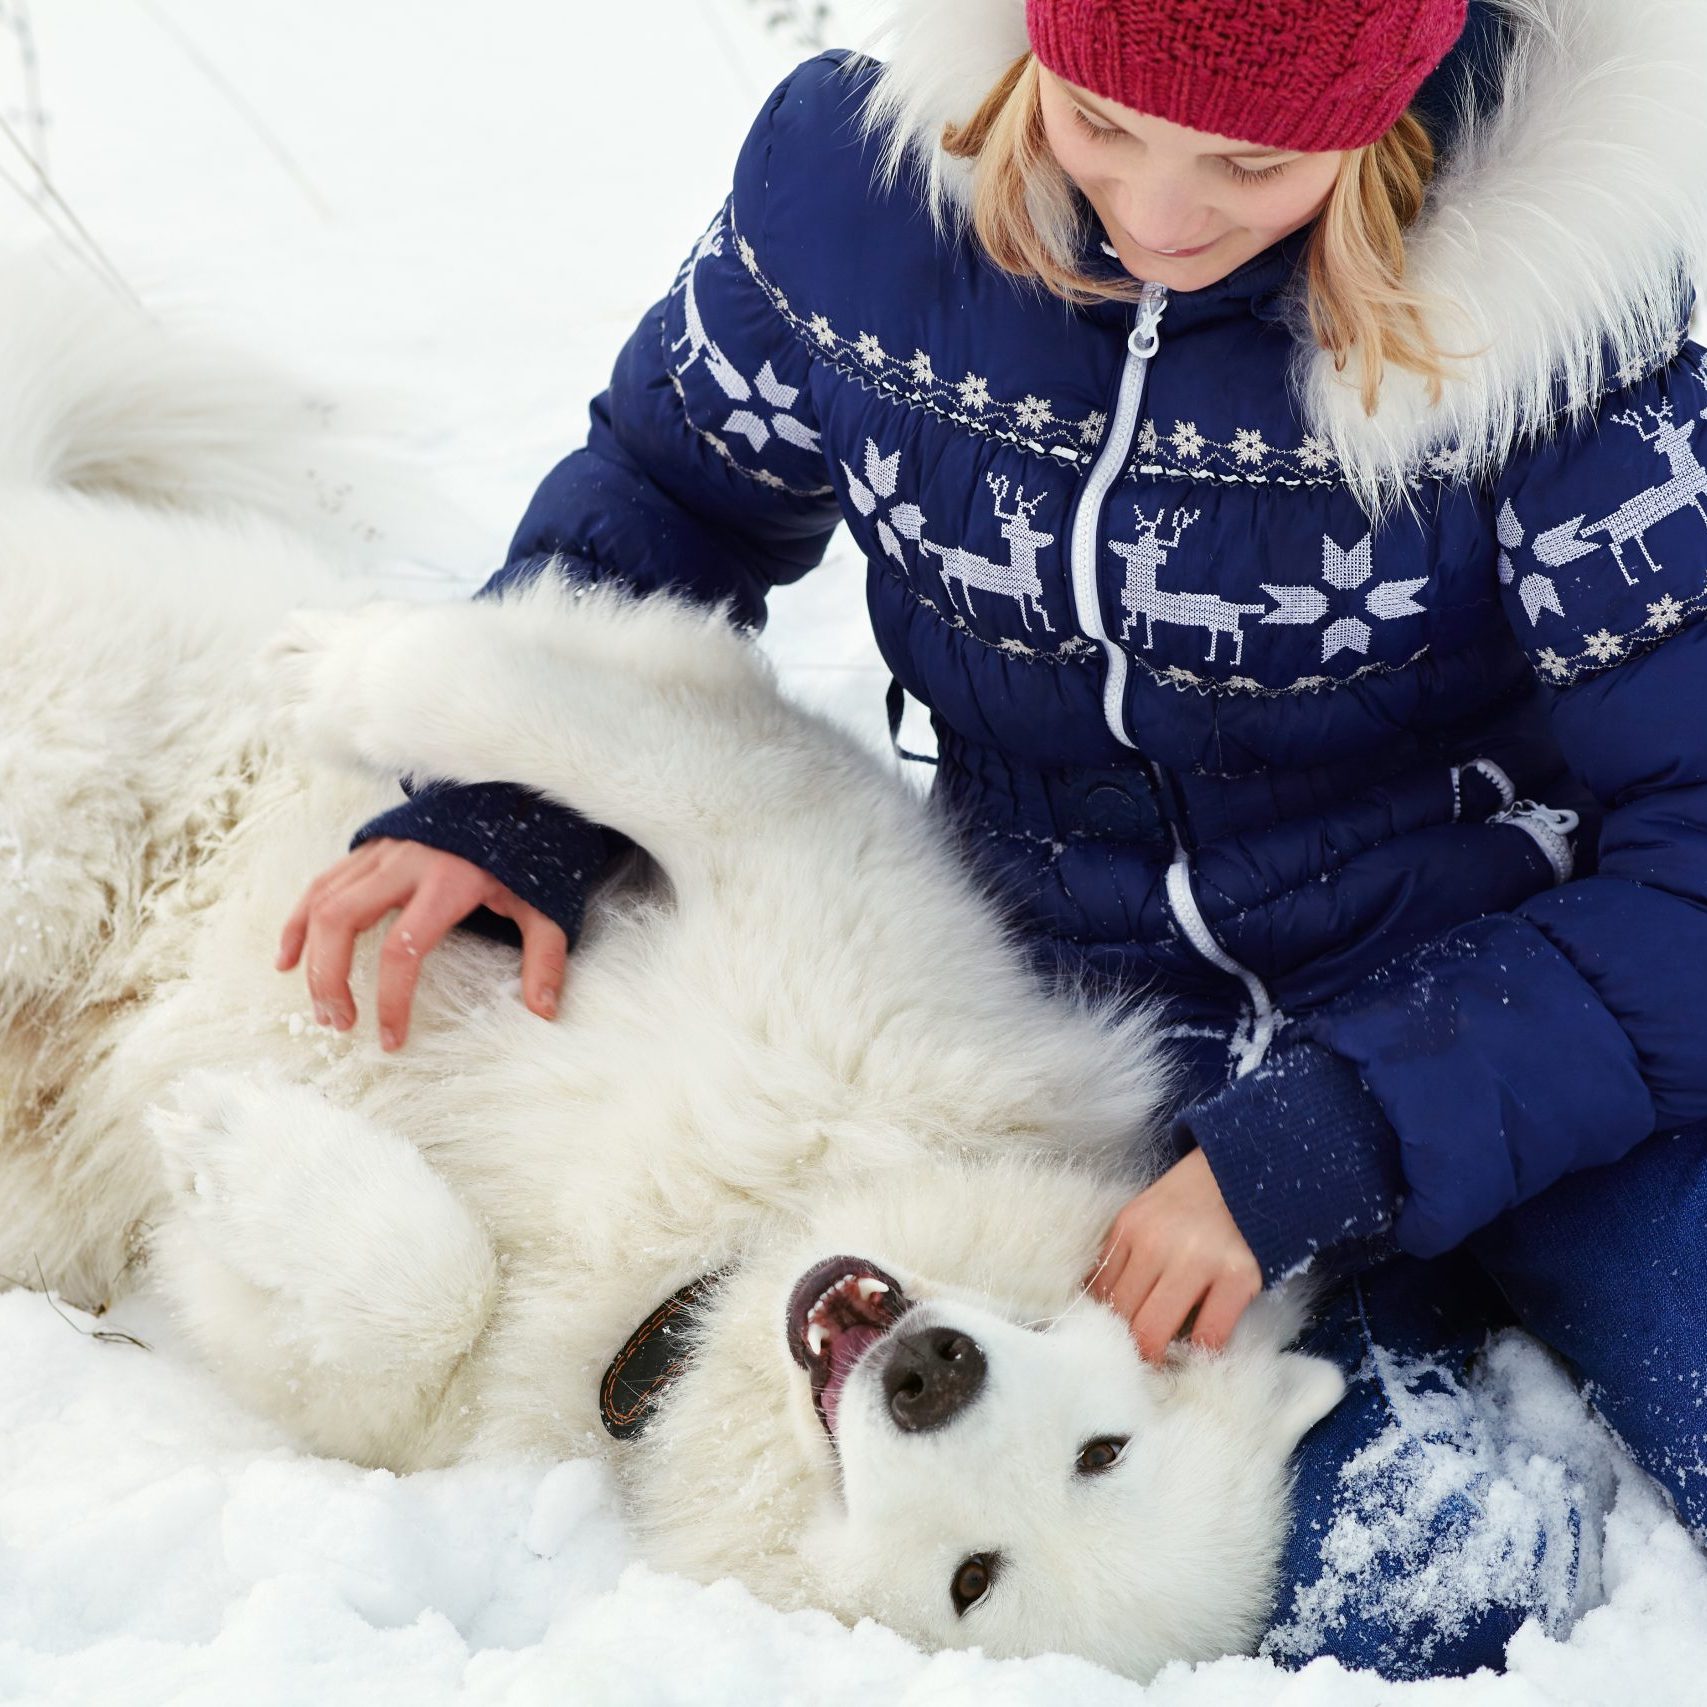 Dog breed Samoyed husky with girl outdoors. dog for a walk with his owner